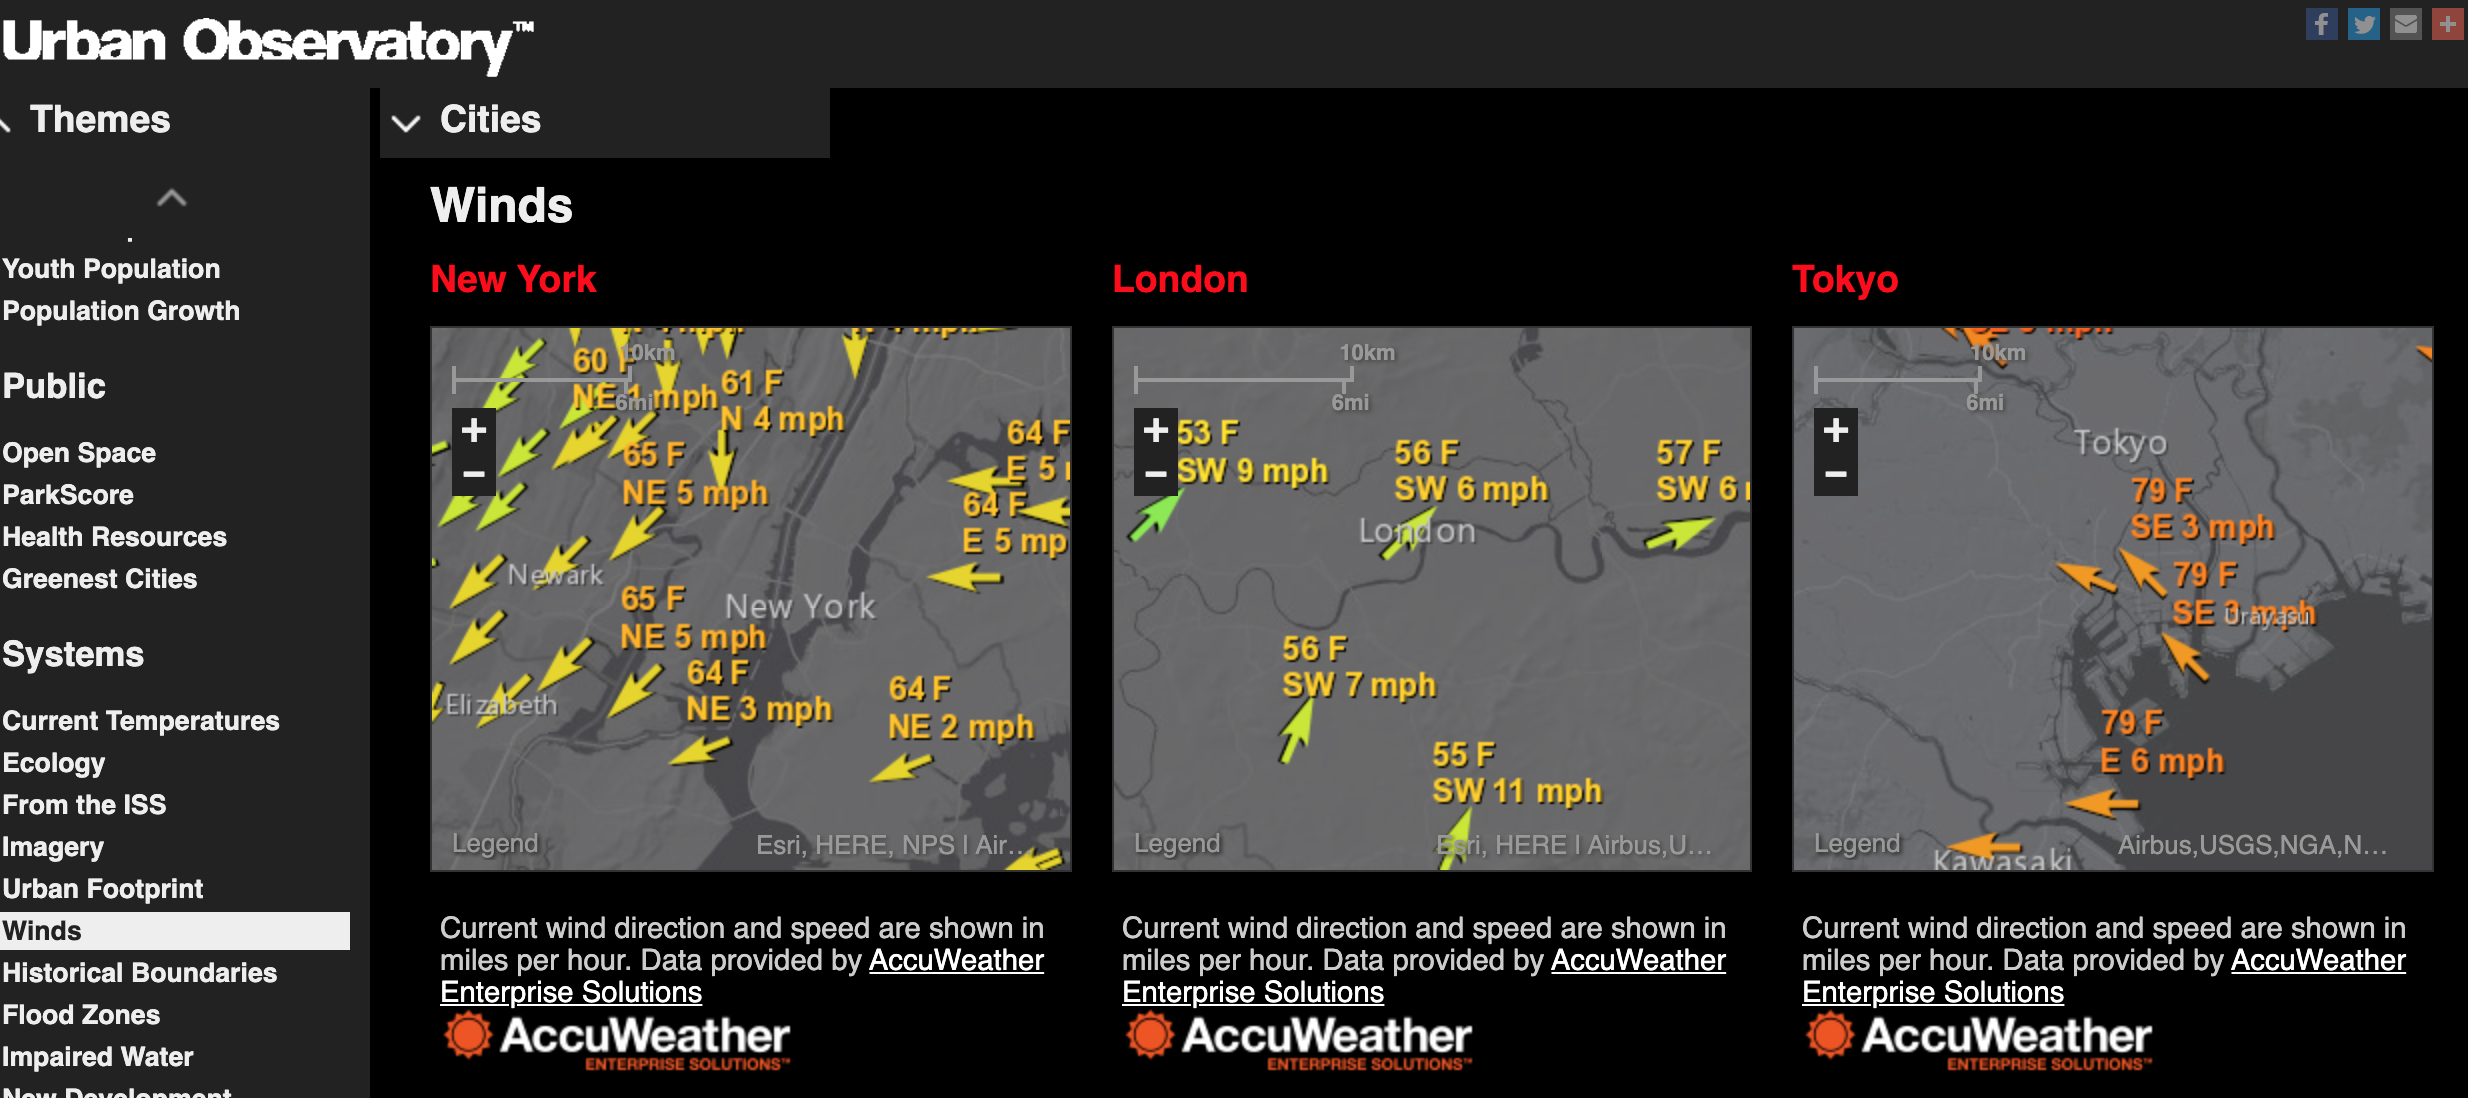 Comparing real time wind data between New York, Tokyo, and London with the Urban Observatory. Screenshot taken by Colin Robertson.  Used with permission